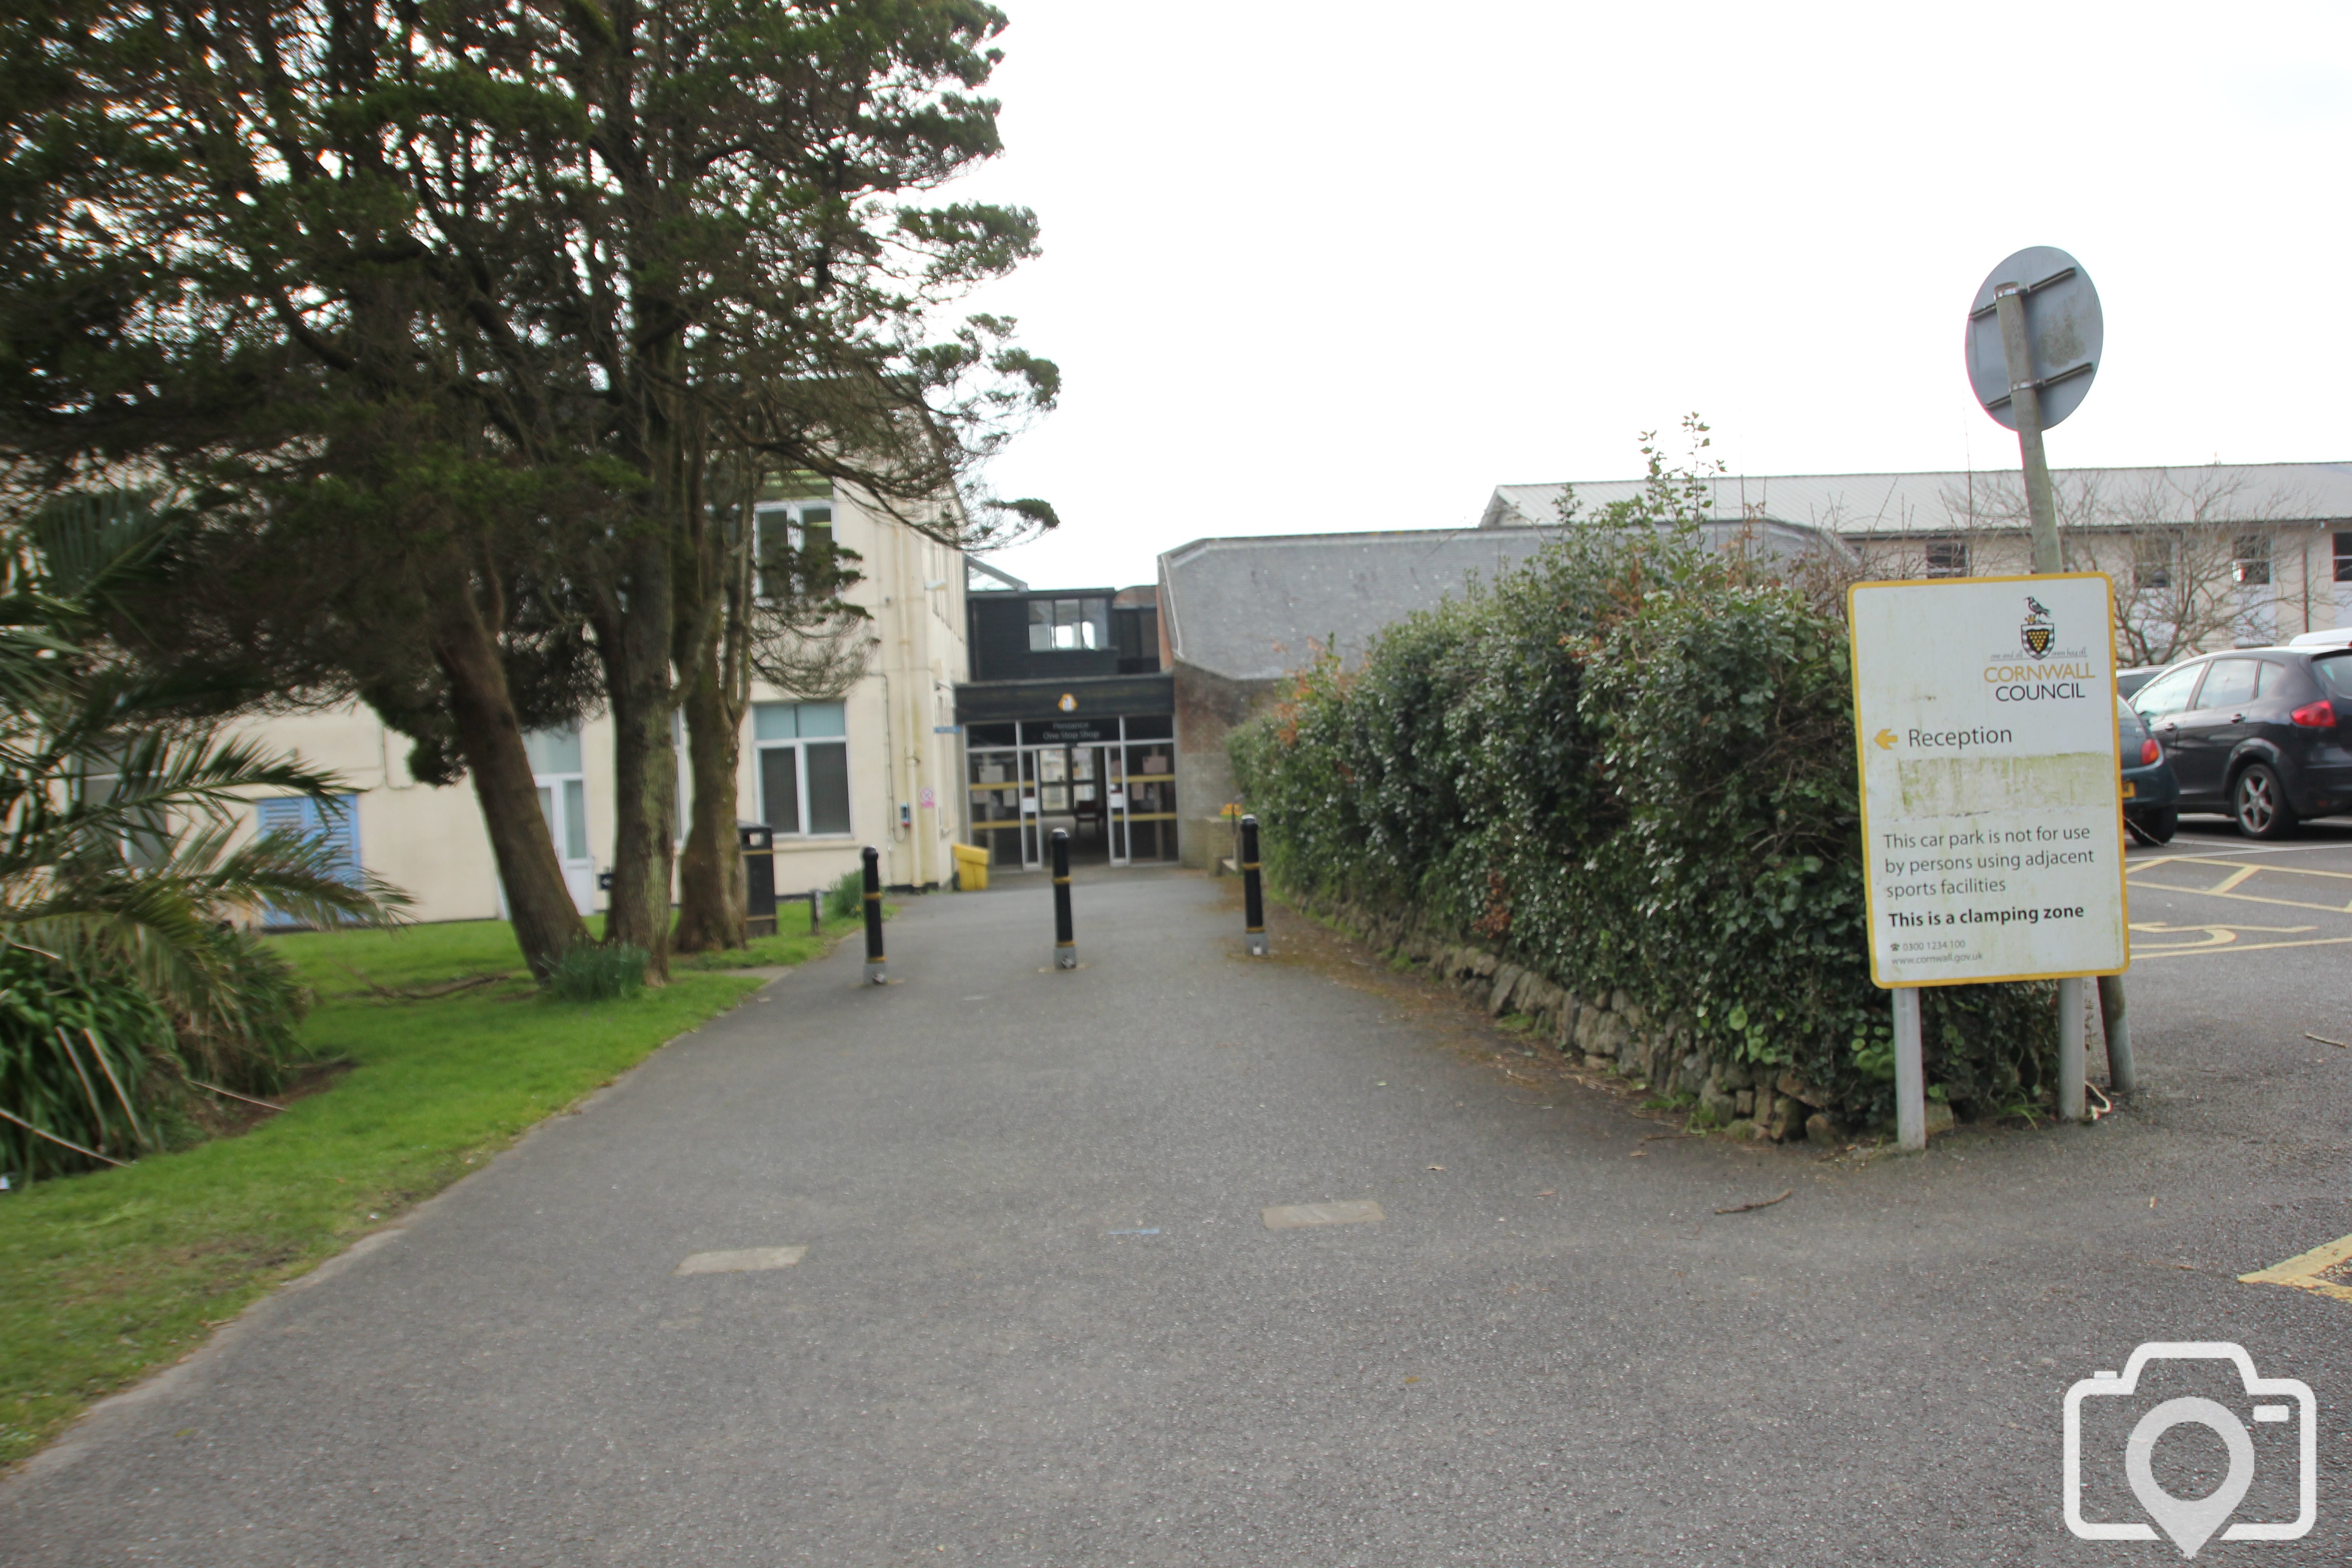 Penwith District Council Main Entrance